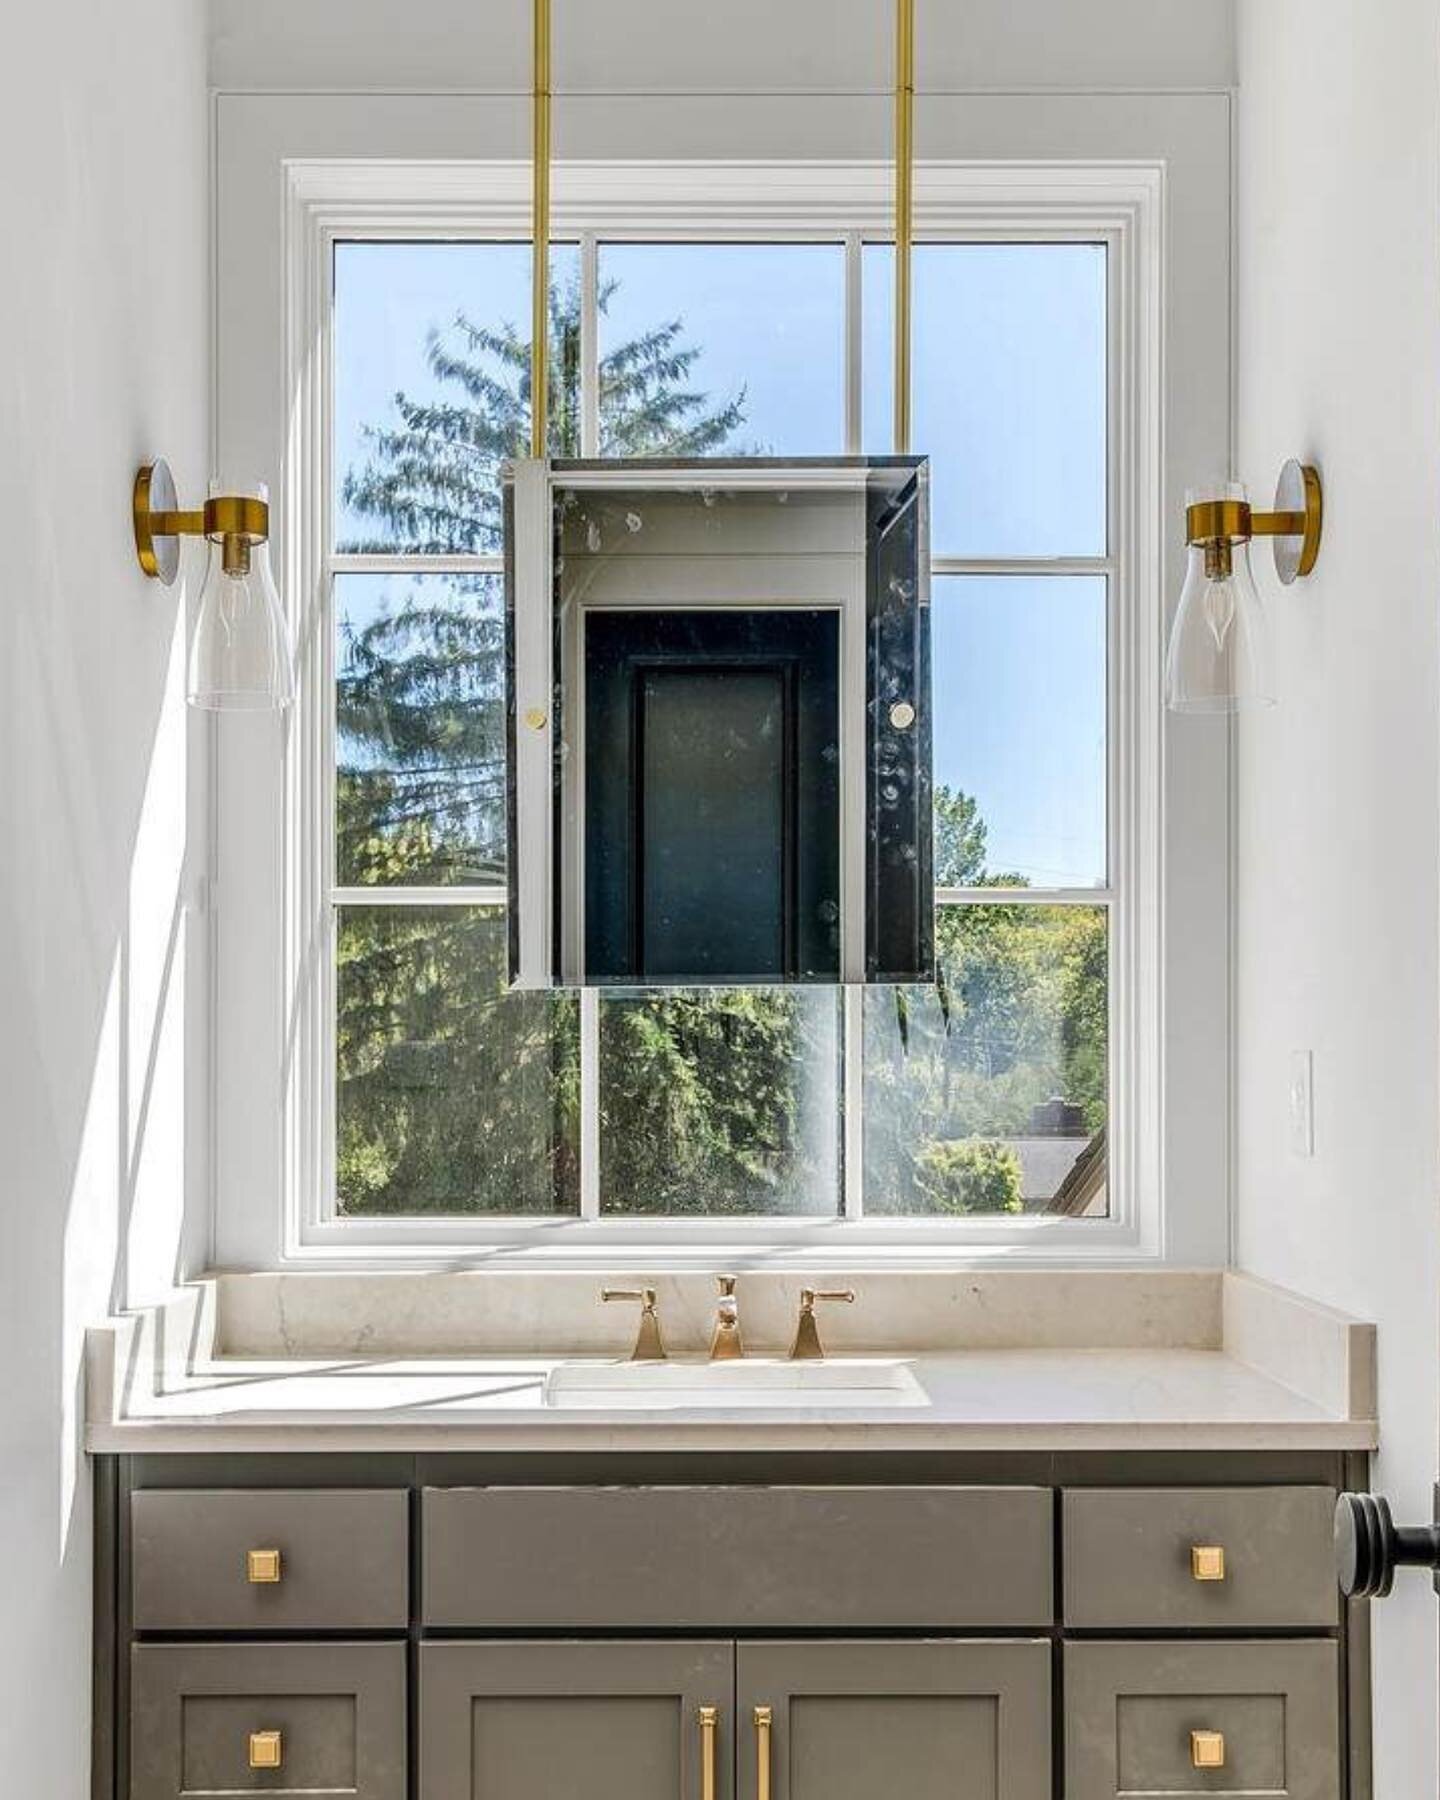 We love a well-balanced interior. This powder room from our latest build is looking good! Stay tuned for more inside looks at Olive Brand Rd. 👀
.
.
#nashvillehomes #nashvilleluxuryhomes #luxuryhome #designinspo #exteriordesign #housegoals #designins